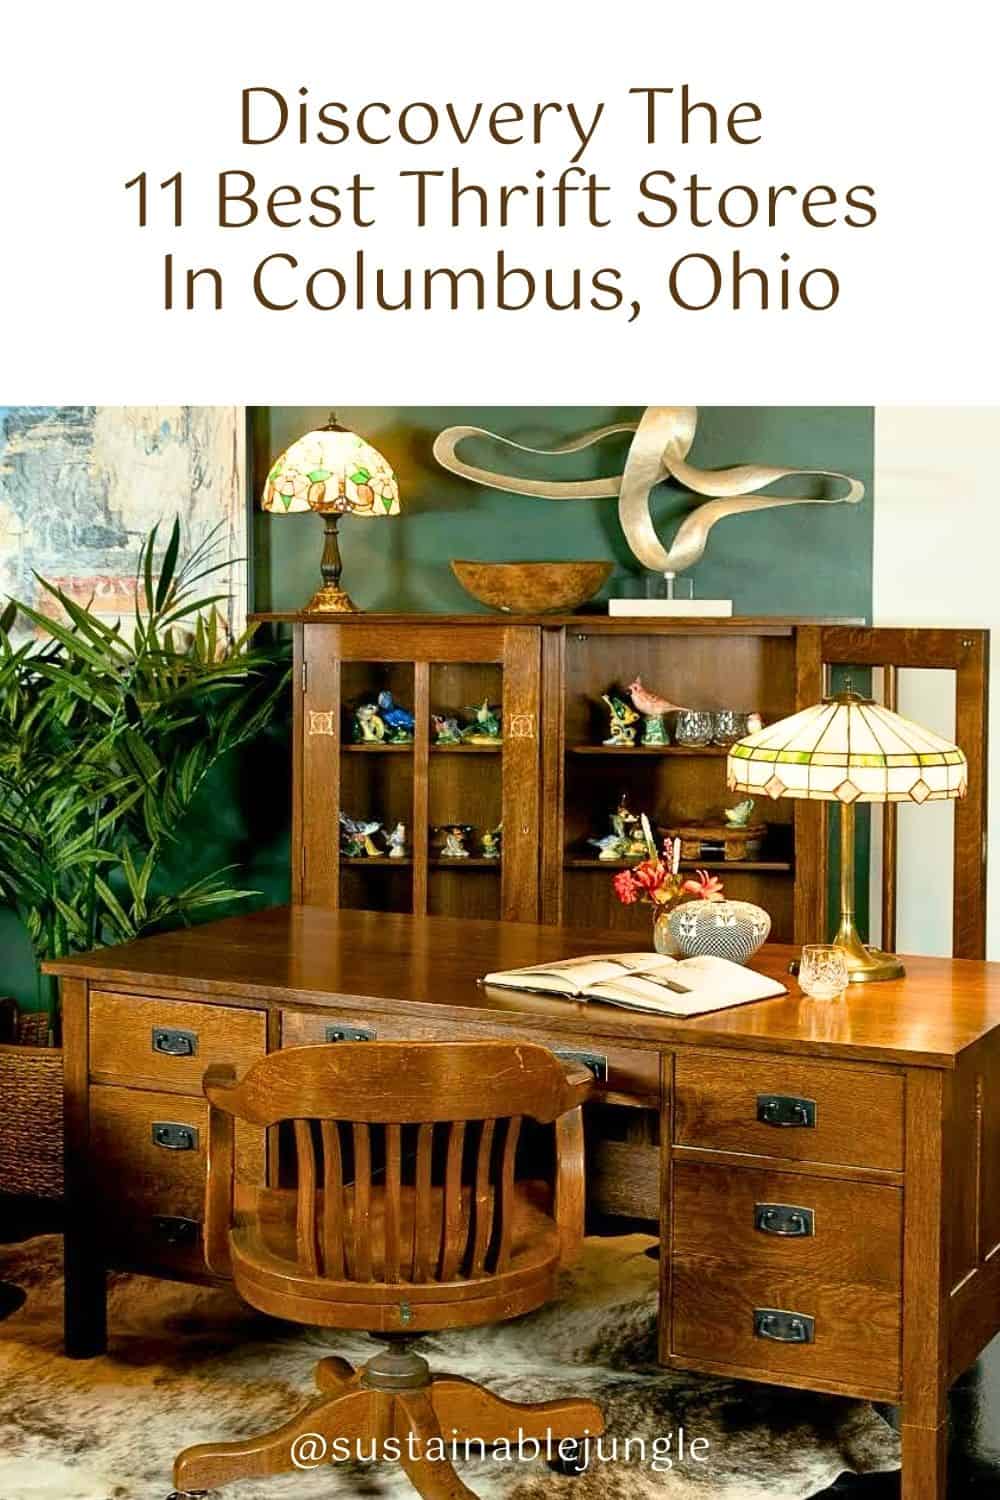 Discovery The 11 Best Thrift Stores In Columbus, Ohio Image by Grandview Mercantile #thriftstorescolumbusohio #bestthriftstoresincolumbus #columbiathriftstores #thriftingcolumbusohio #columbusohiothriftstores #sustainablejungle